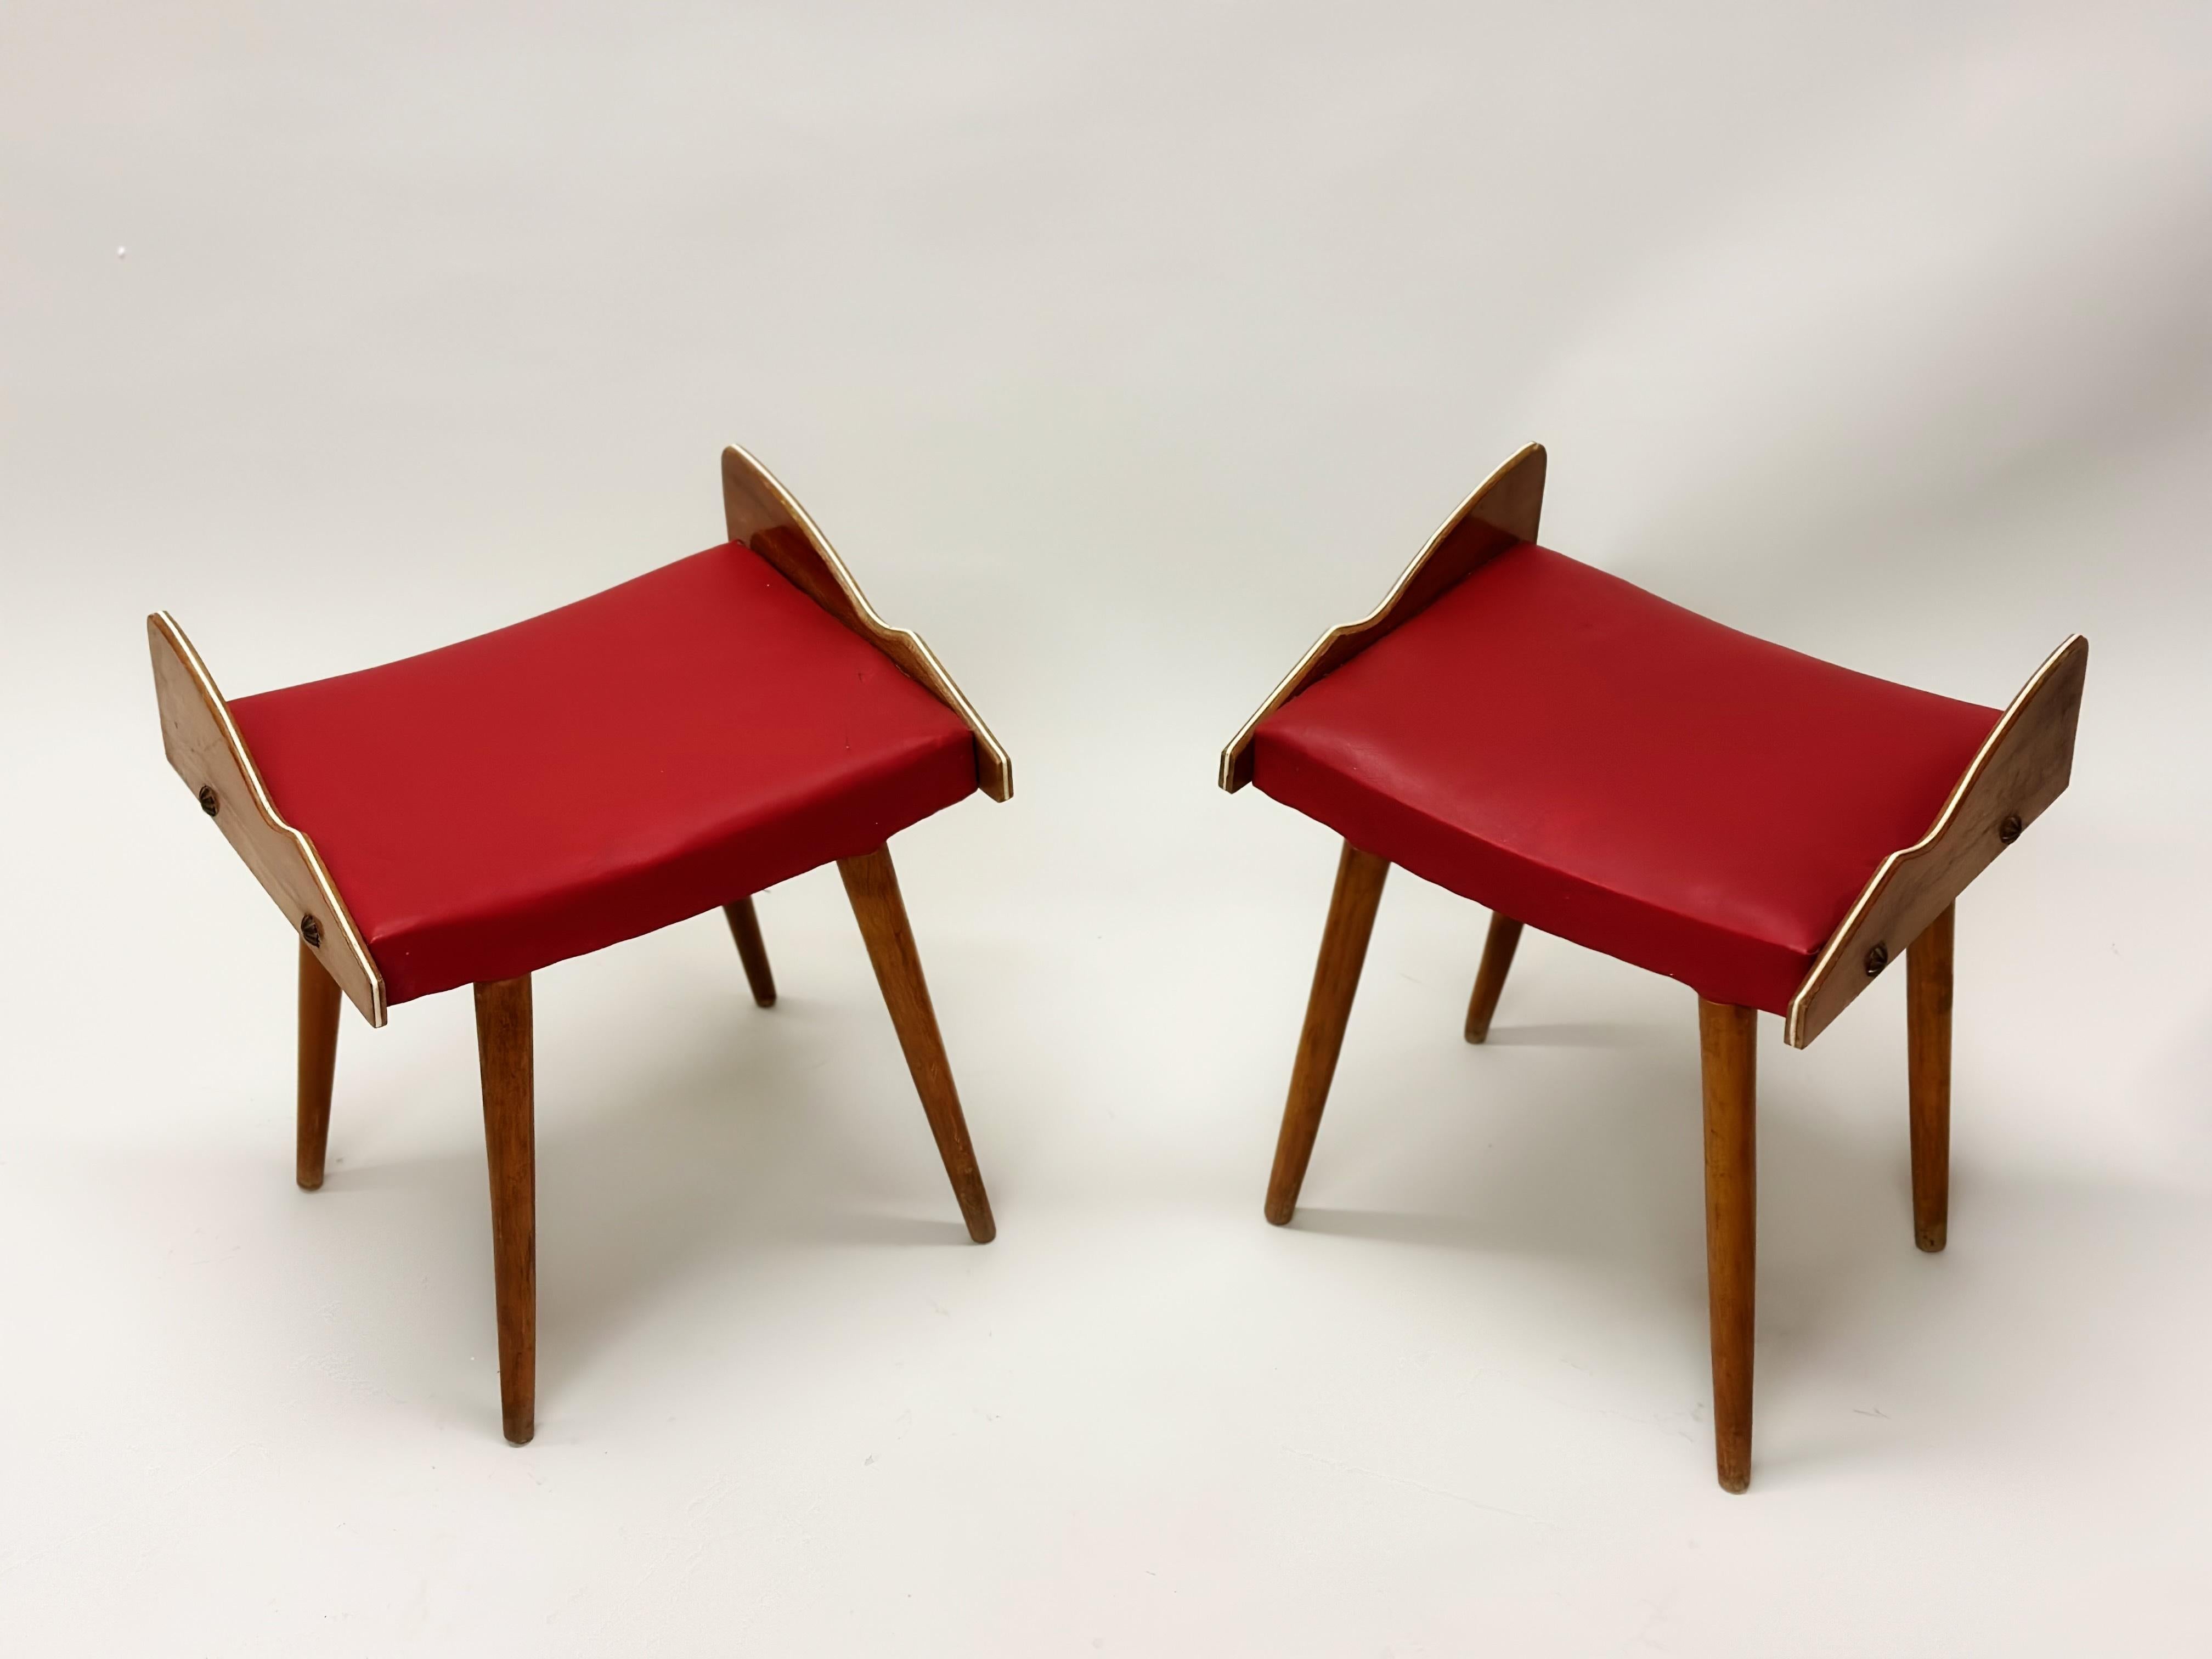 Pair of Italian Mid-Century Modern Wood Benches / Stools Attributed to Gio Ponti For Sale 3